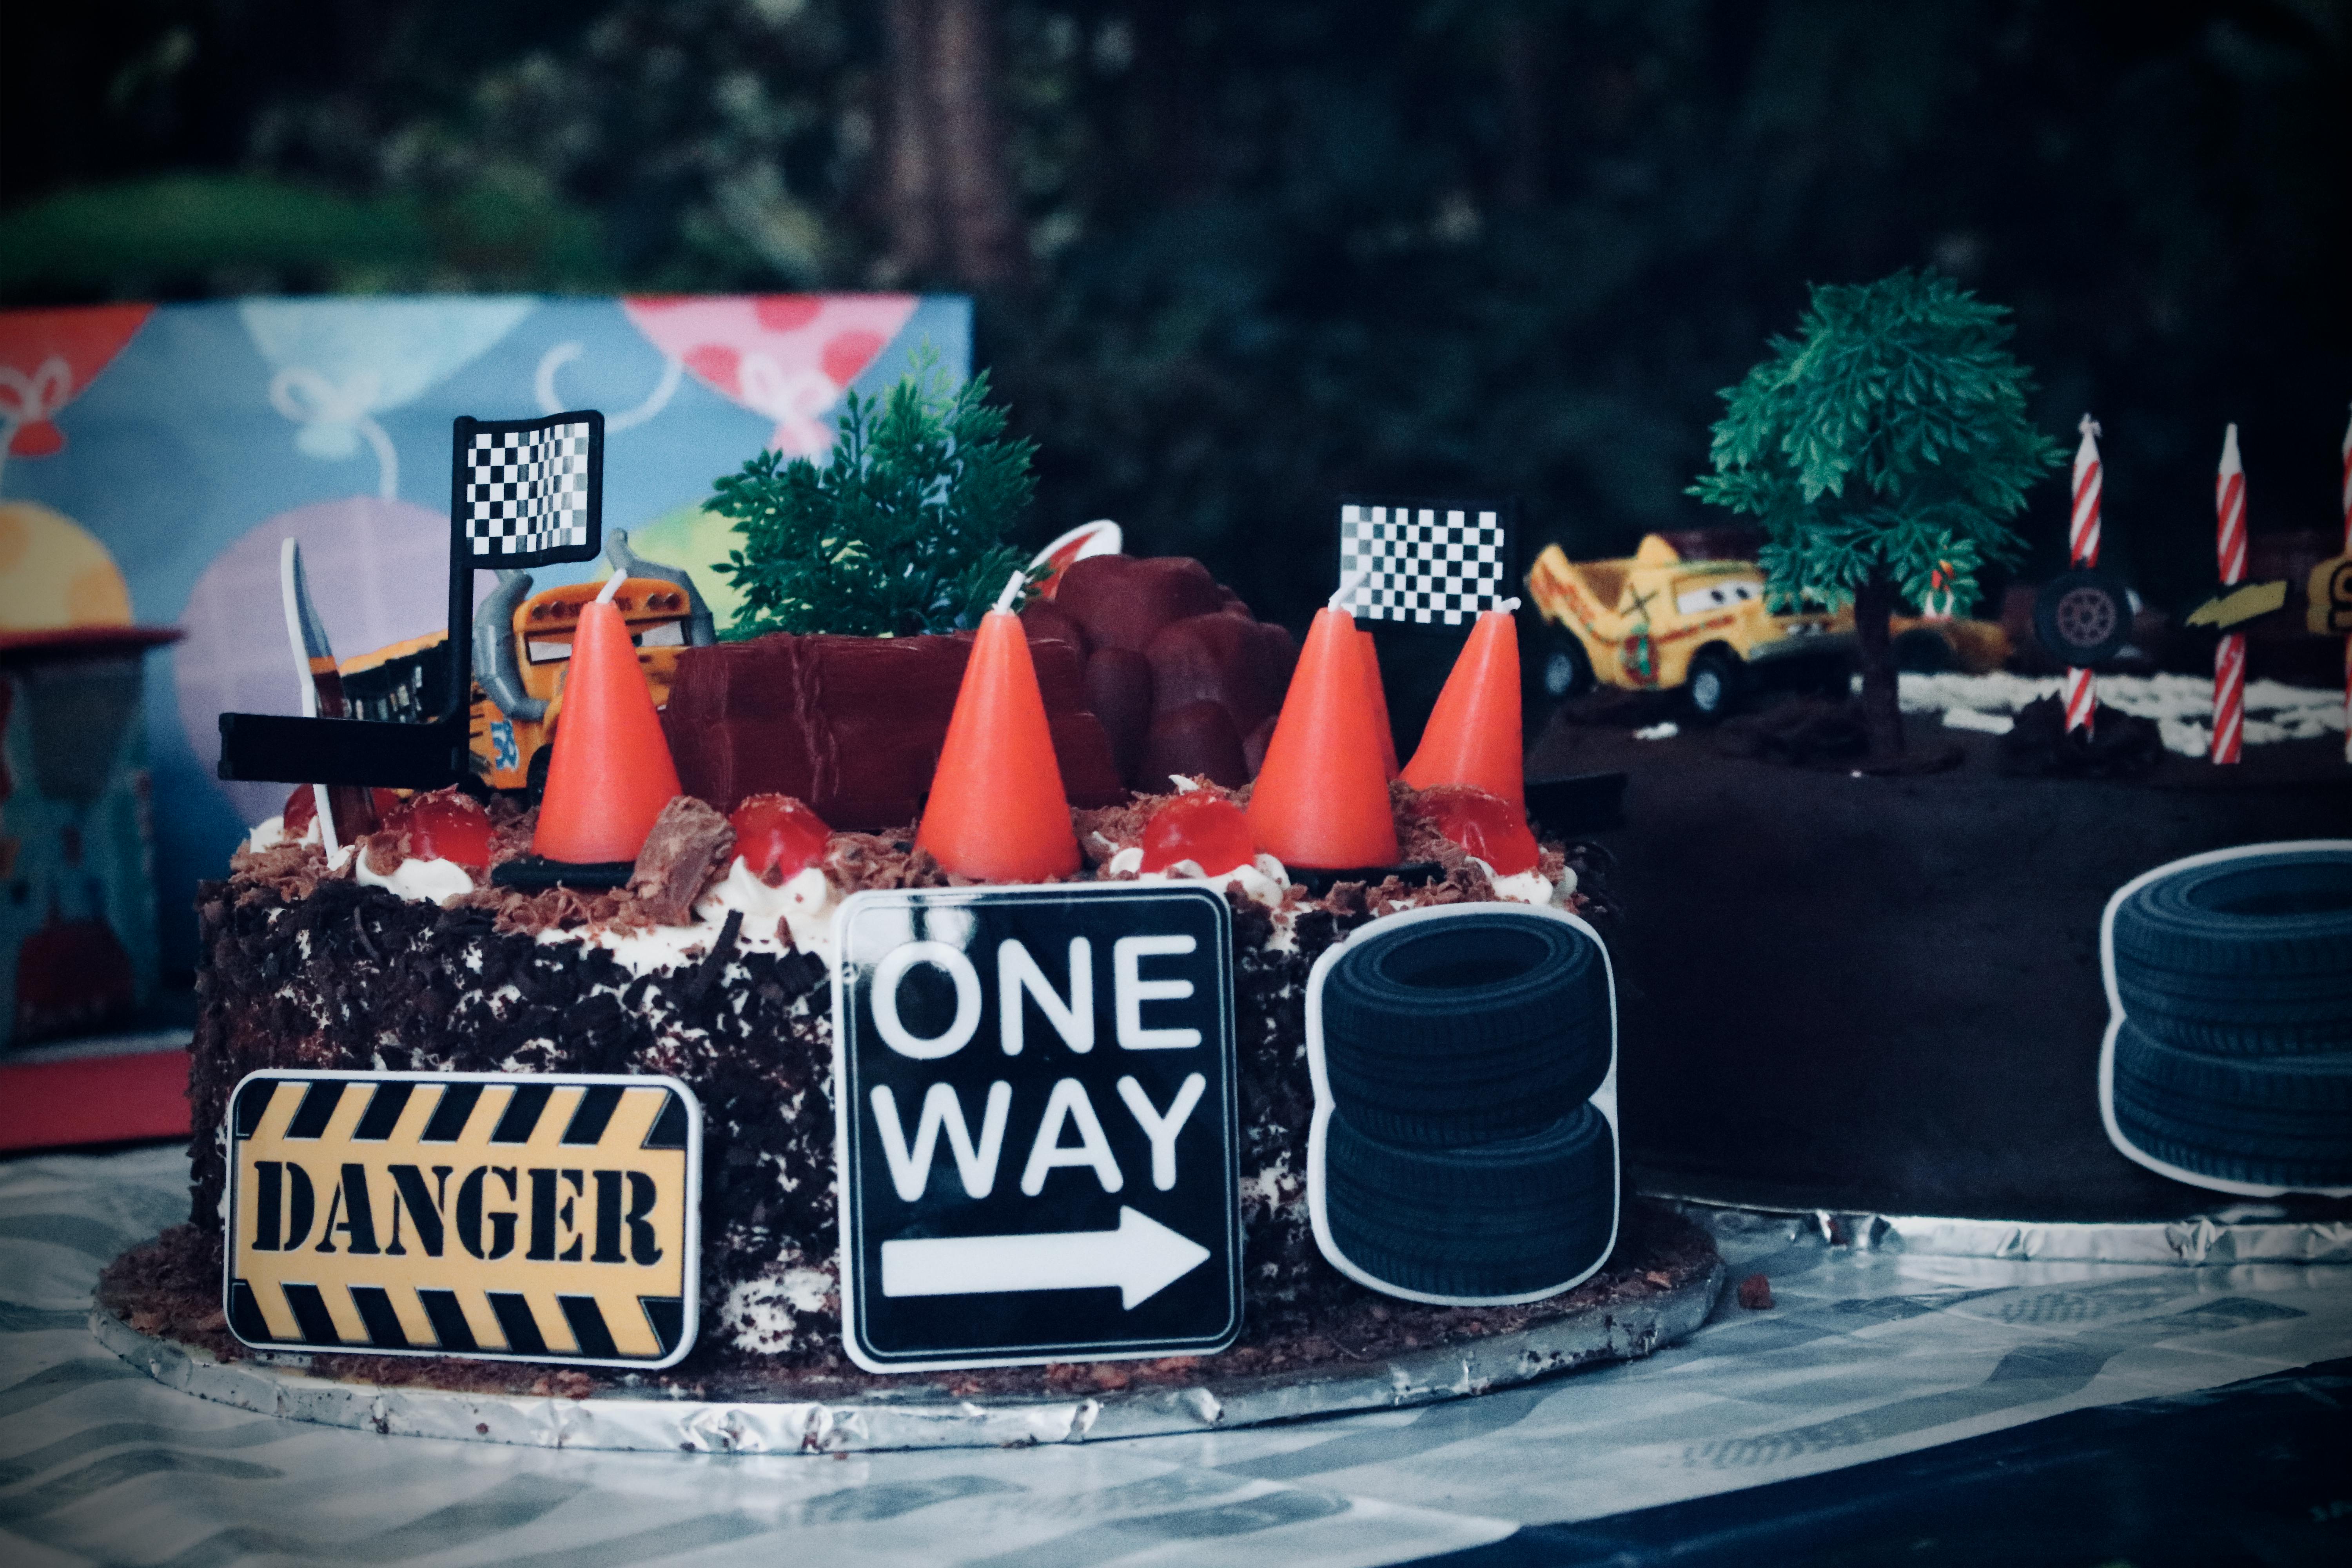 Cake With Road Signs